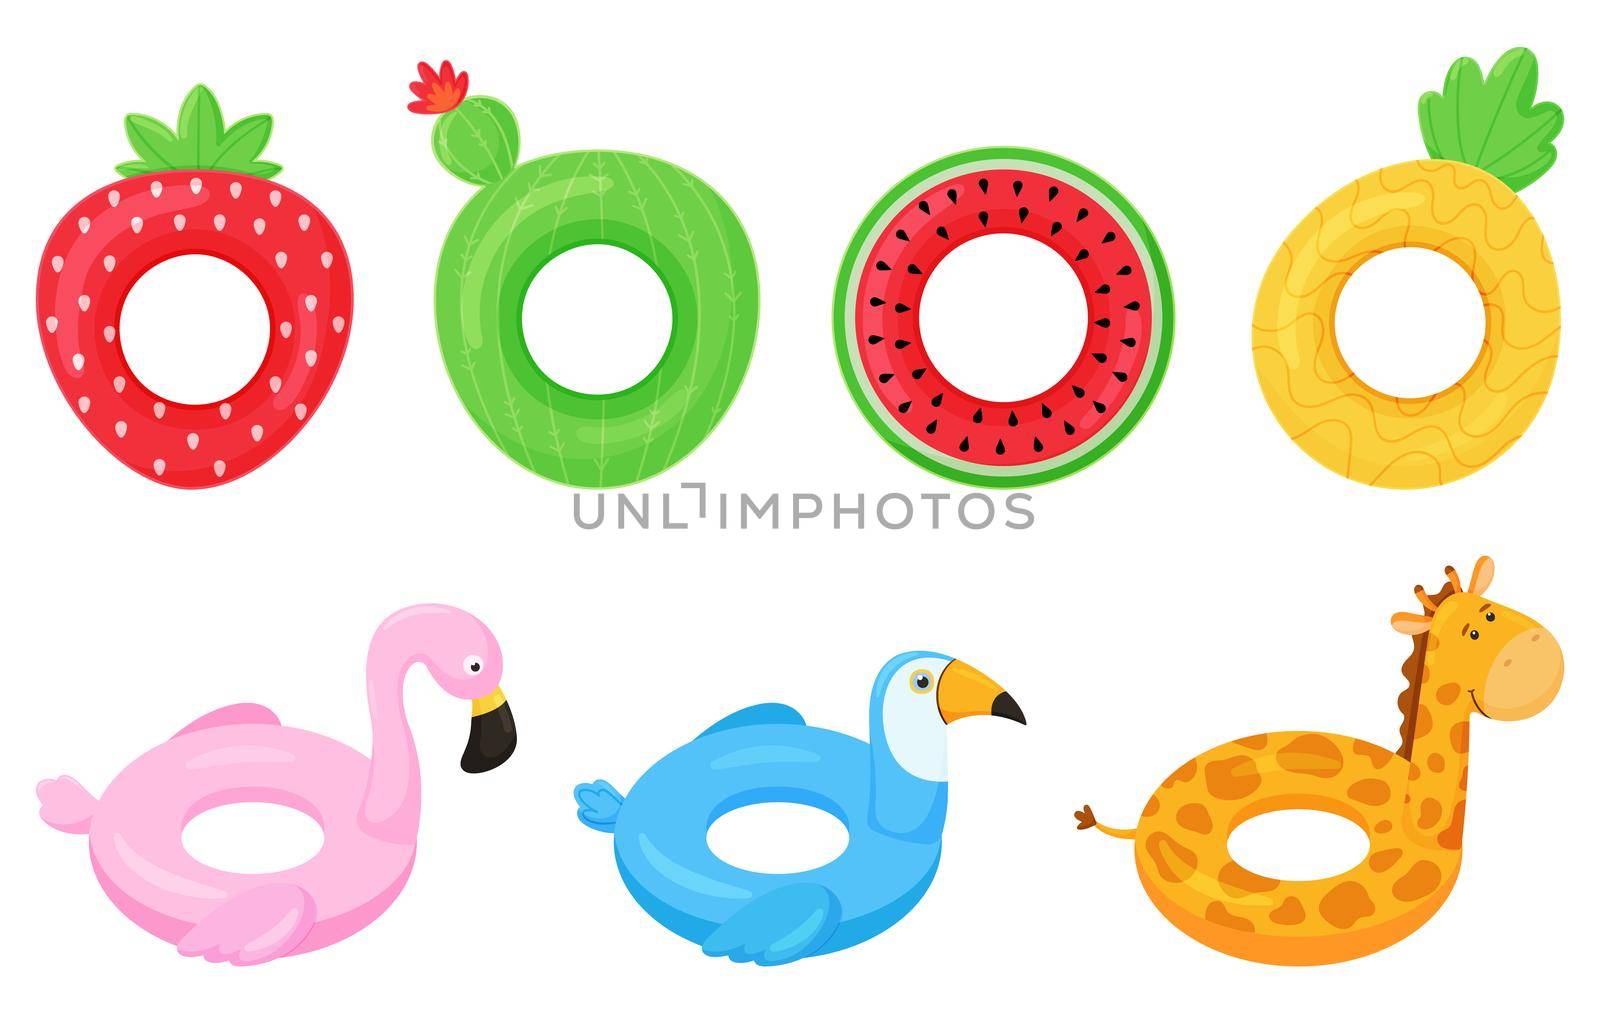 Set of rubber colorful inflatable swimming rings. Strawberry, cactus, pineapple, watermelon, pink flamingo, giraffe and toucan. Vector illustration isolated on white background.